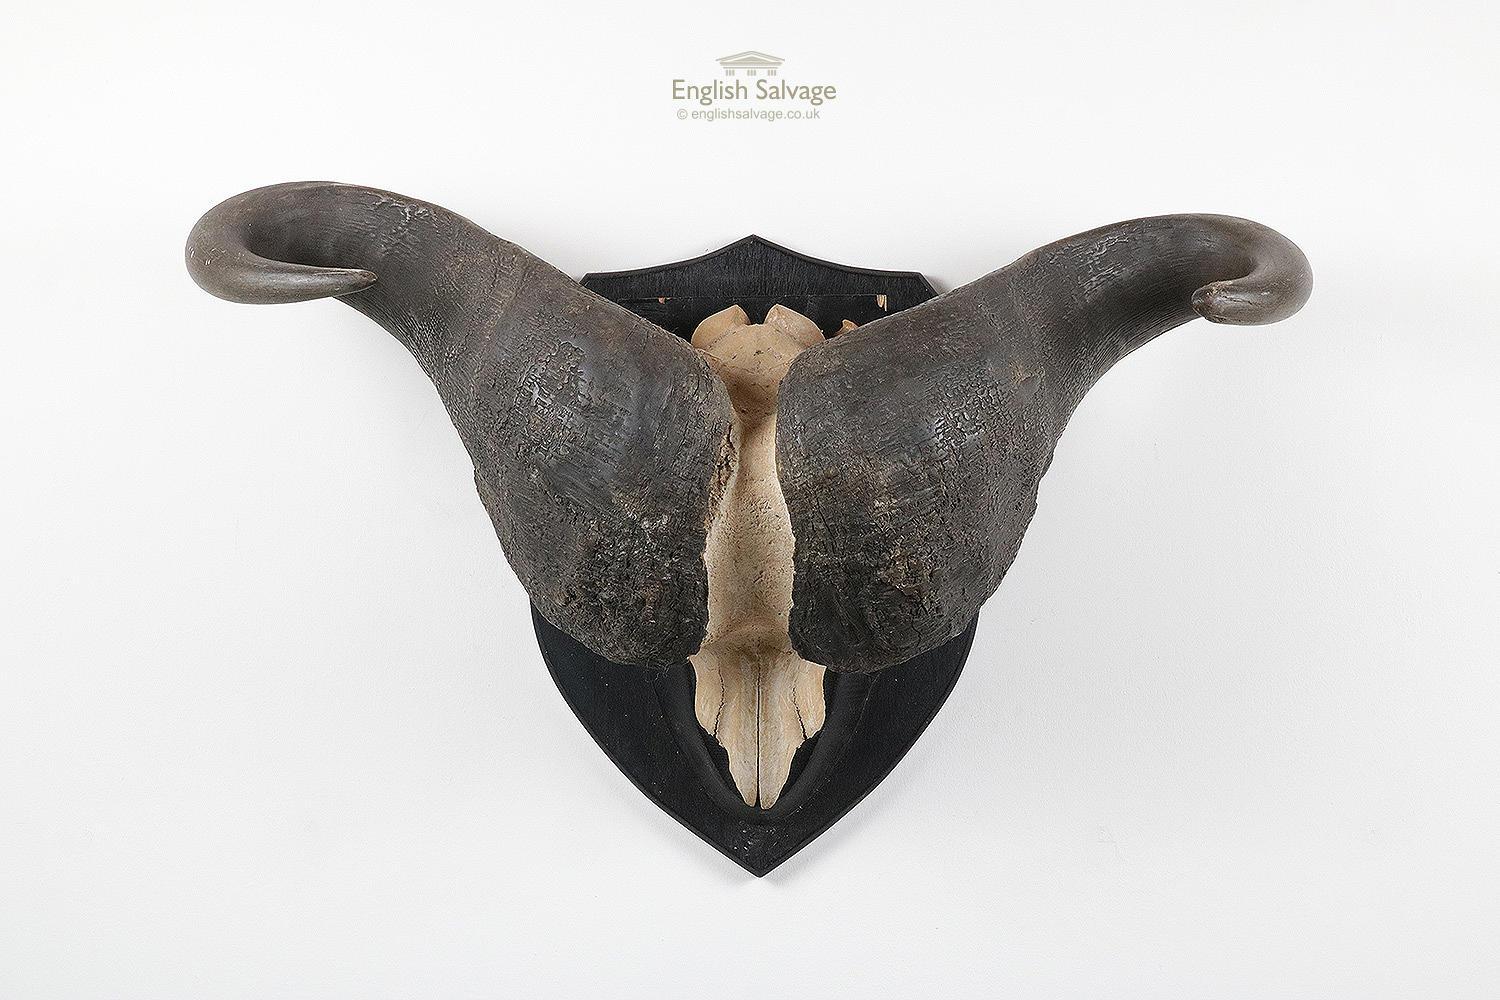 Imposing pair of cape buffalo horns and skull mounted on a shield or wall plaque. A real statement piece for the home or in a bar perhaps. Some marks and scuffs but appears in good order.